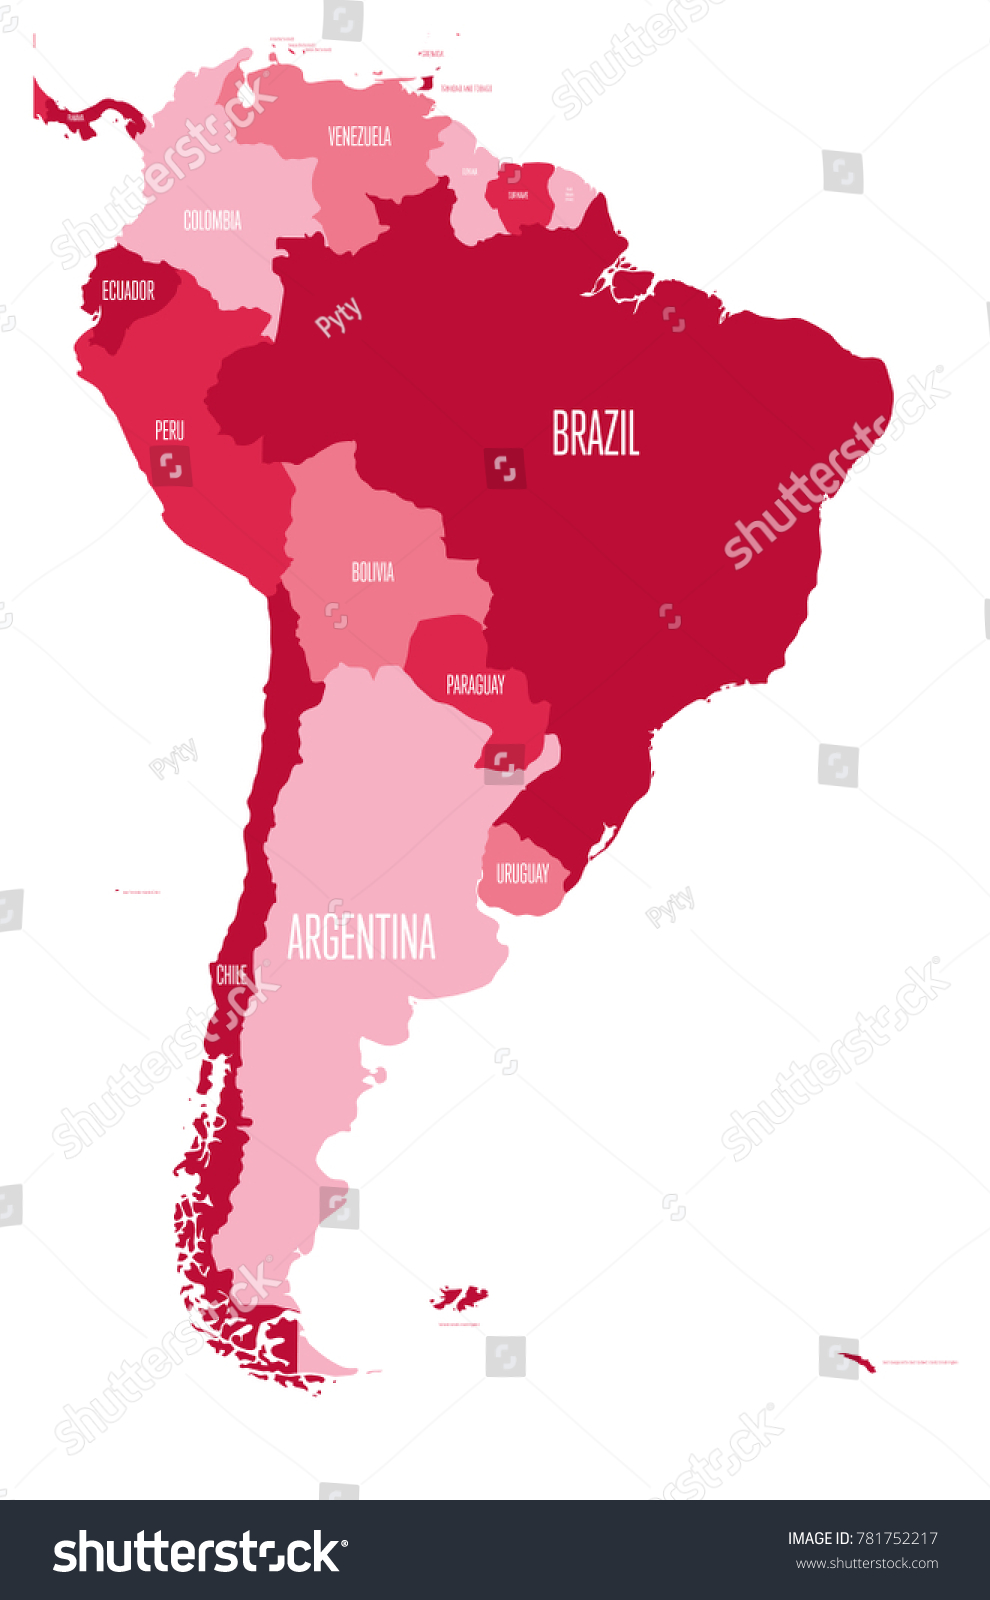 Political Map South America Simple Flat Stock Vector Royalty Free 781752217 Shutterstock 2311